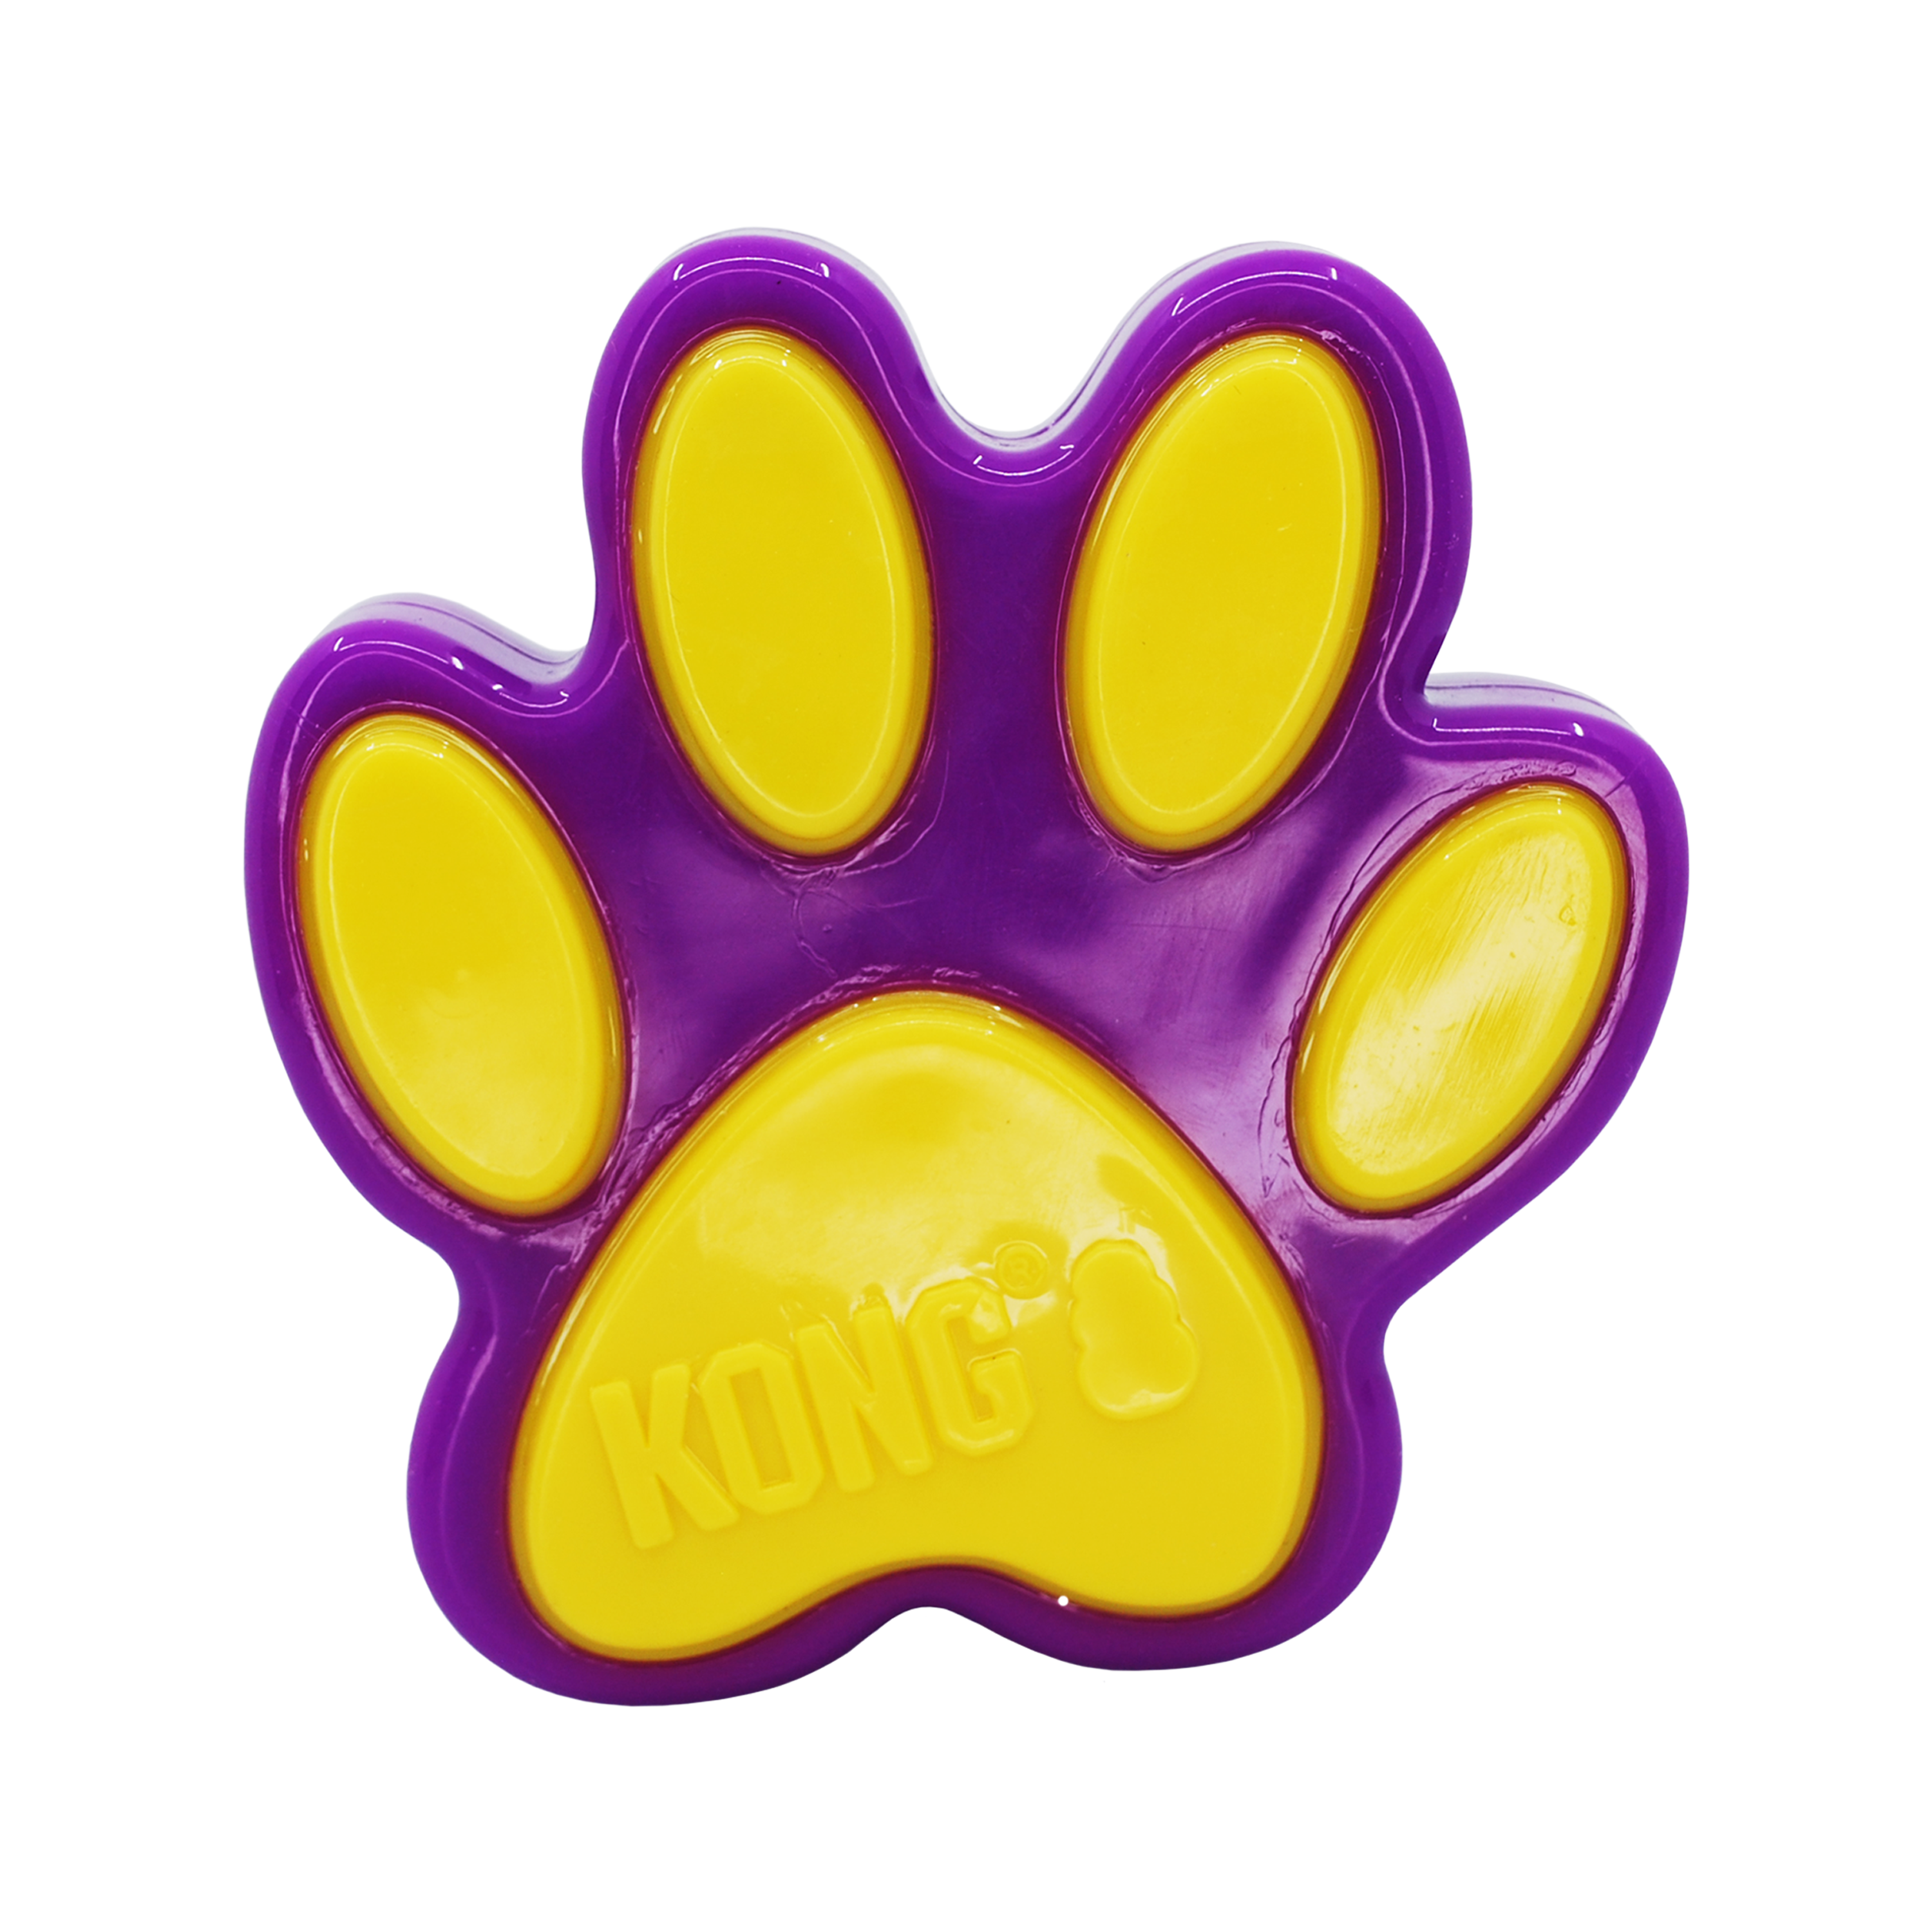 Eon Paw offpack product image